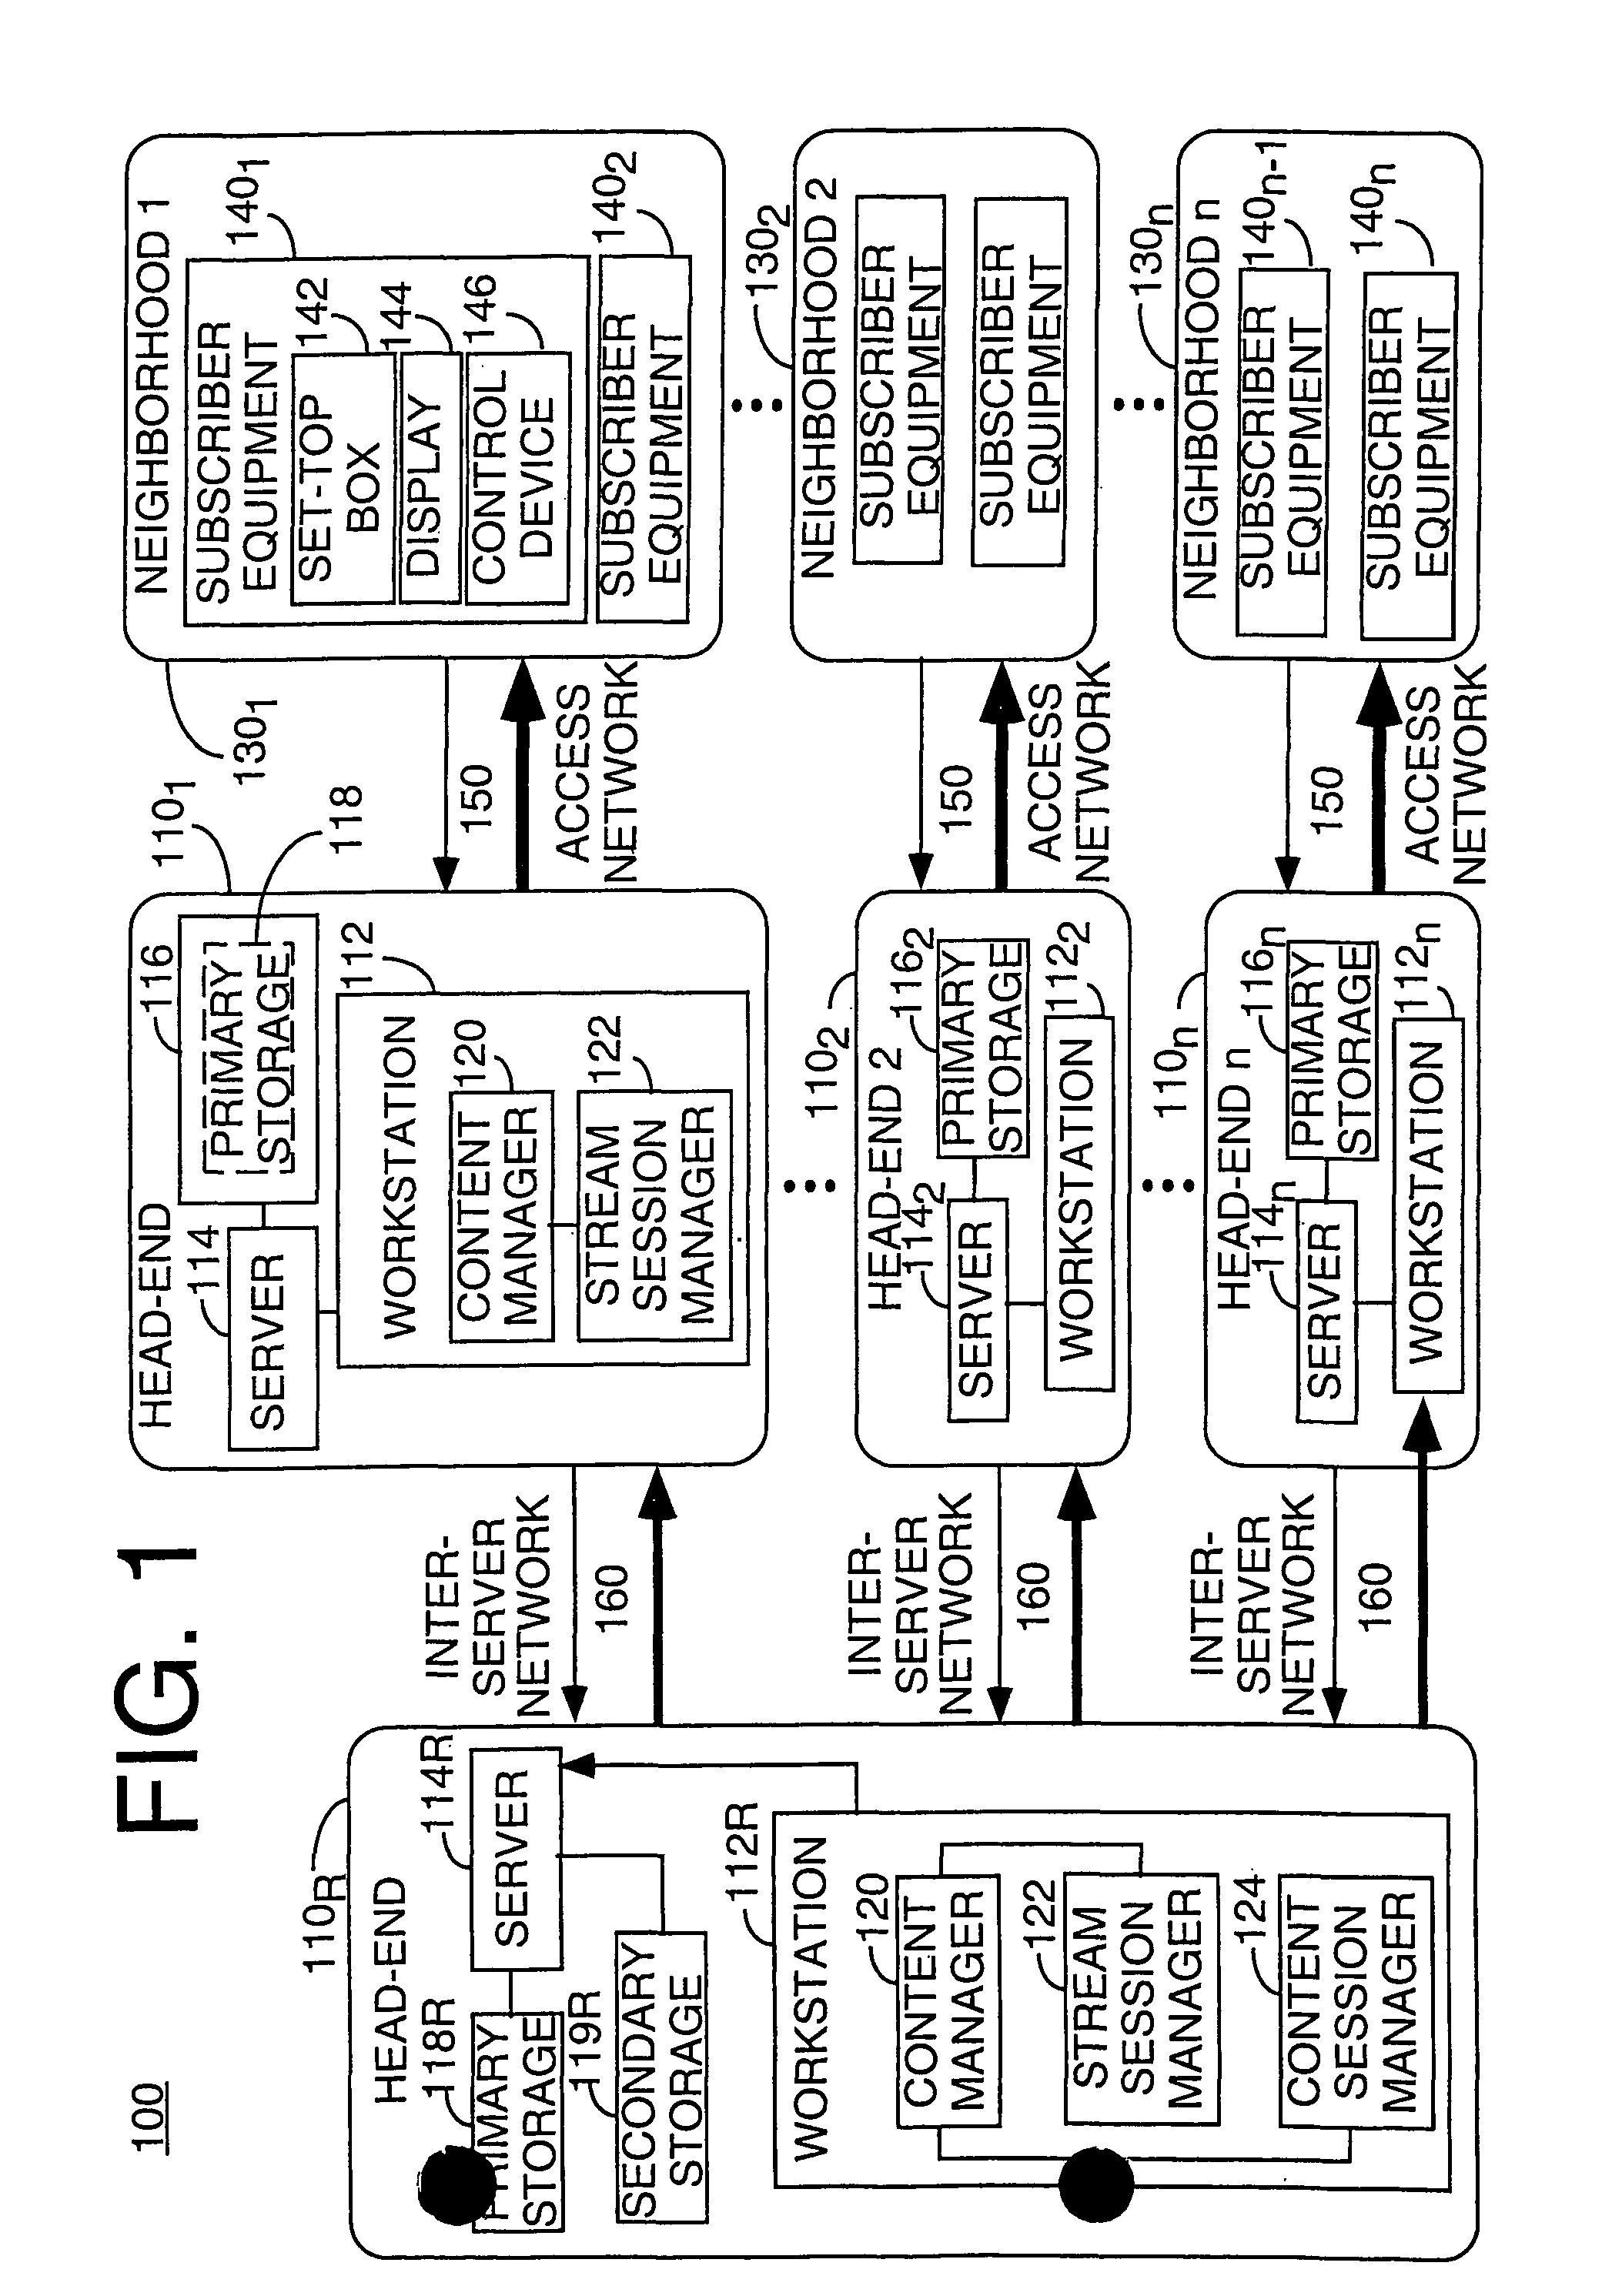 Method and apparatus for hierarchical distribution of video content for an interactive information distribution system